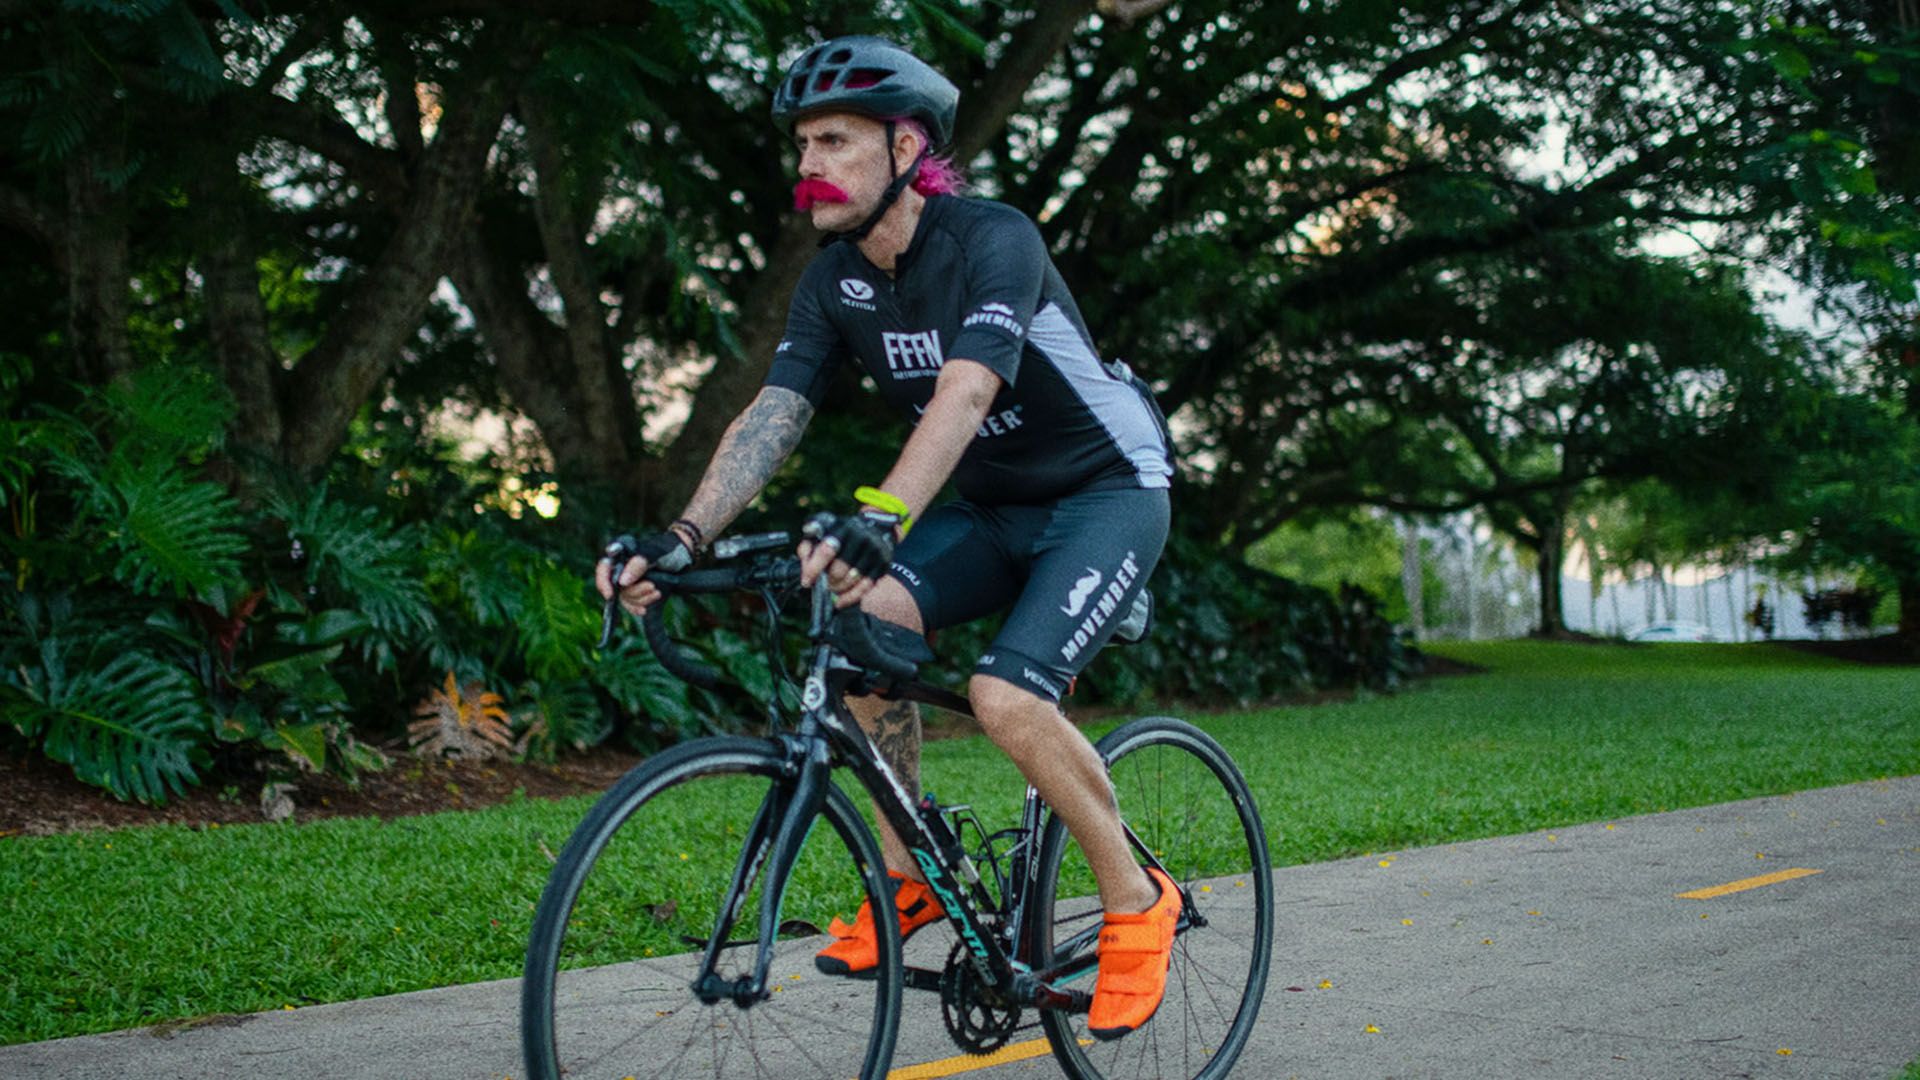 Man with pink moustache rides his bike on a footpath with trees in the background